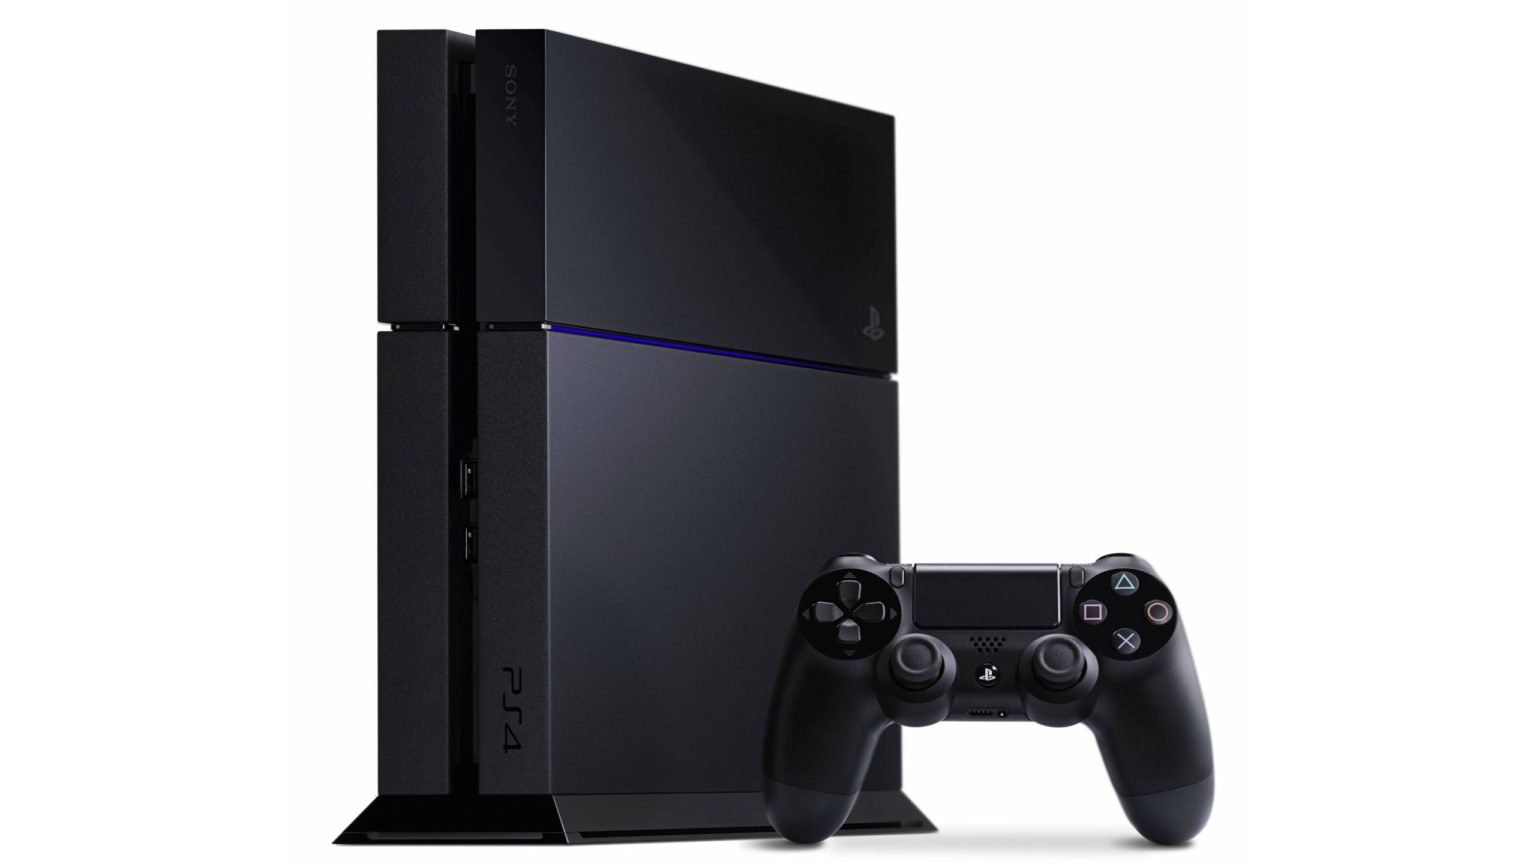 The Pros and Cons of the PS4 What You Need to Know